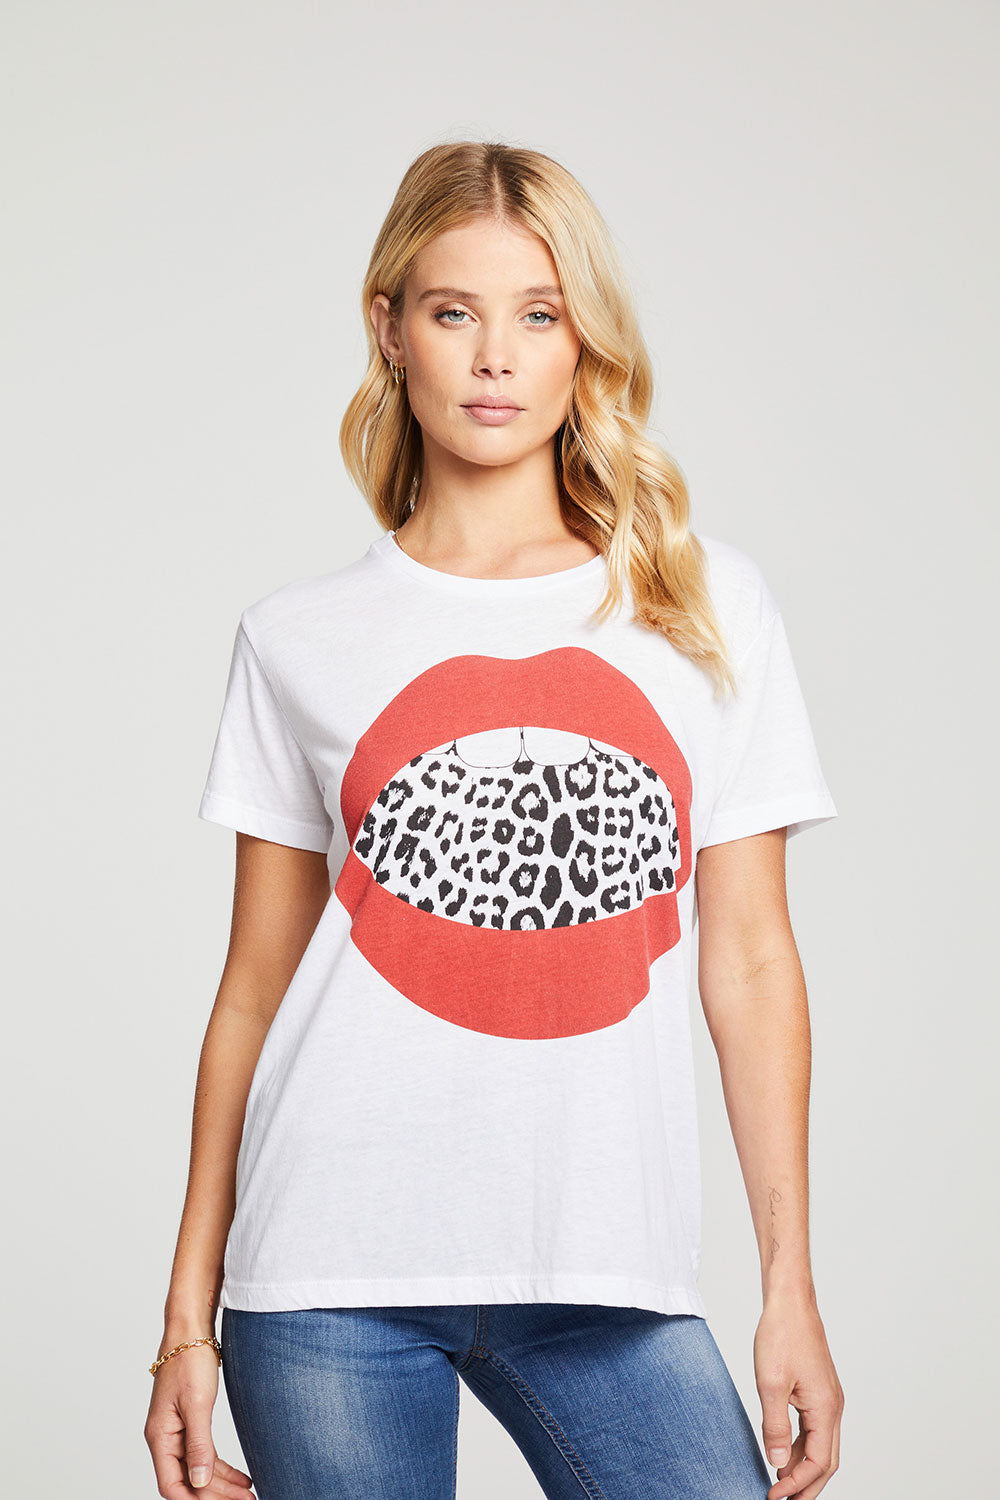 Animal Lips WOMENS chaserbrand